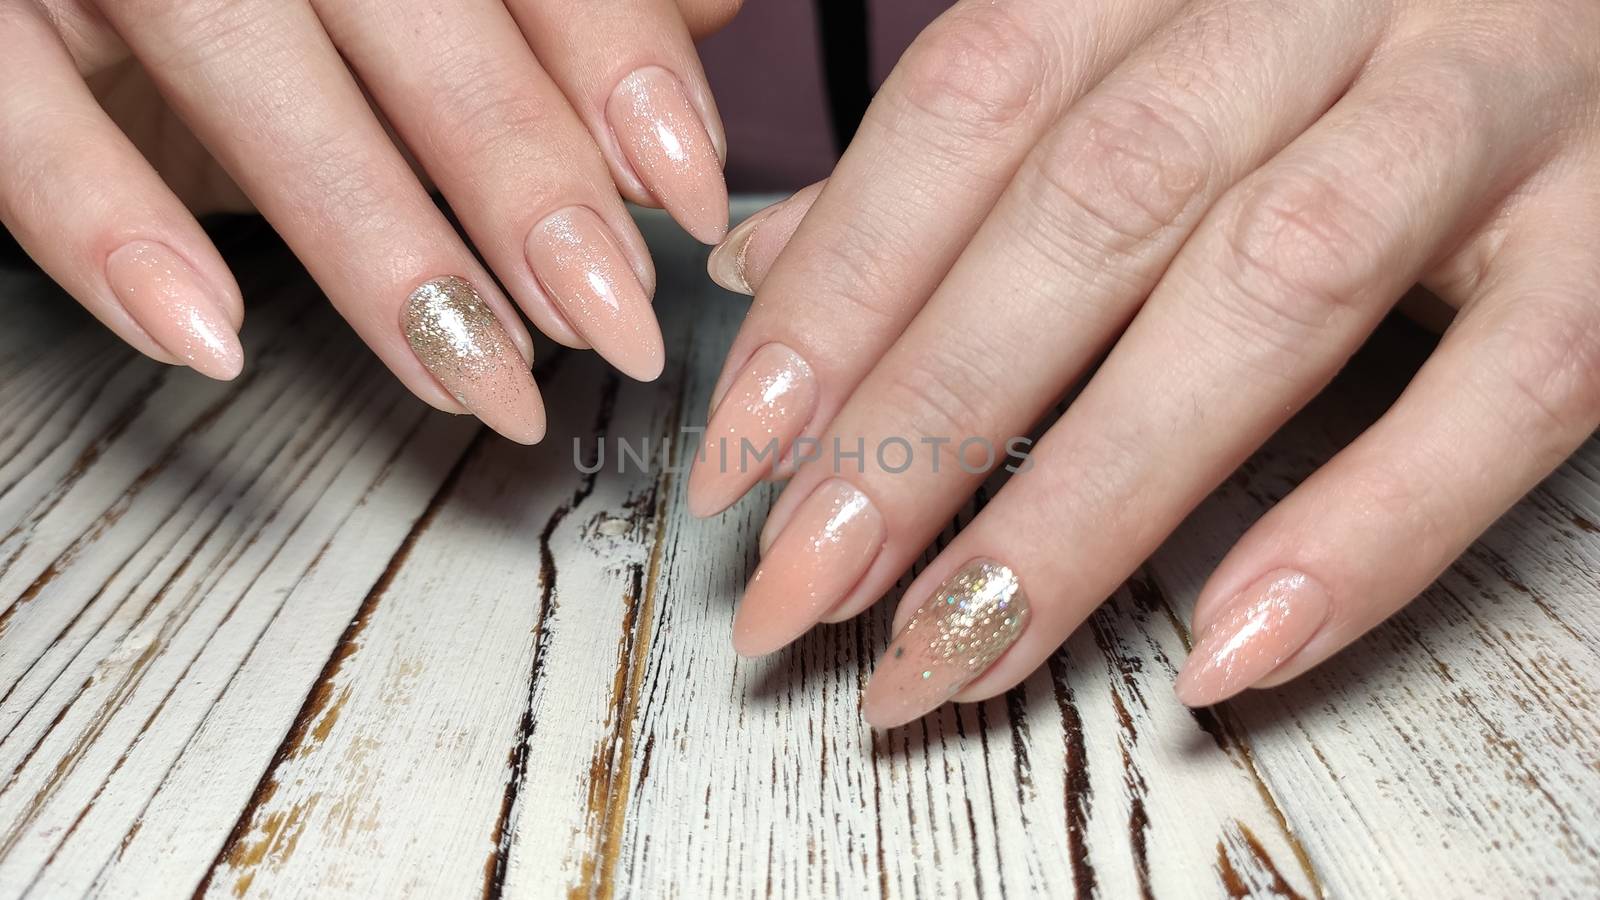 Hands Care. Design Hand With Pastel Nails by SmirMaxStock